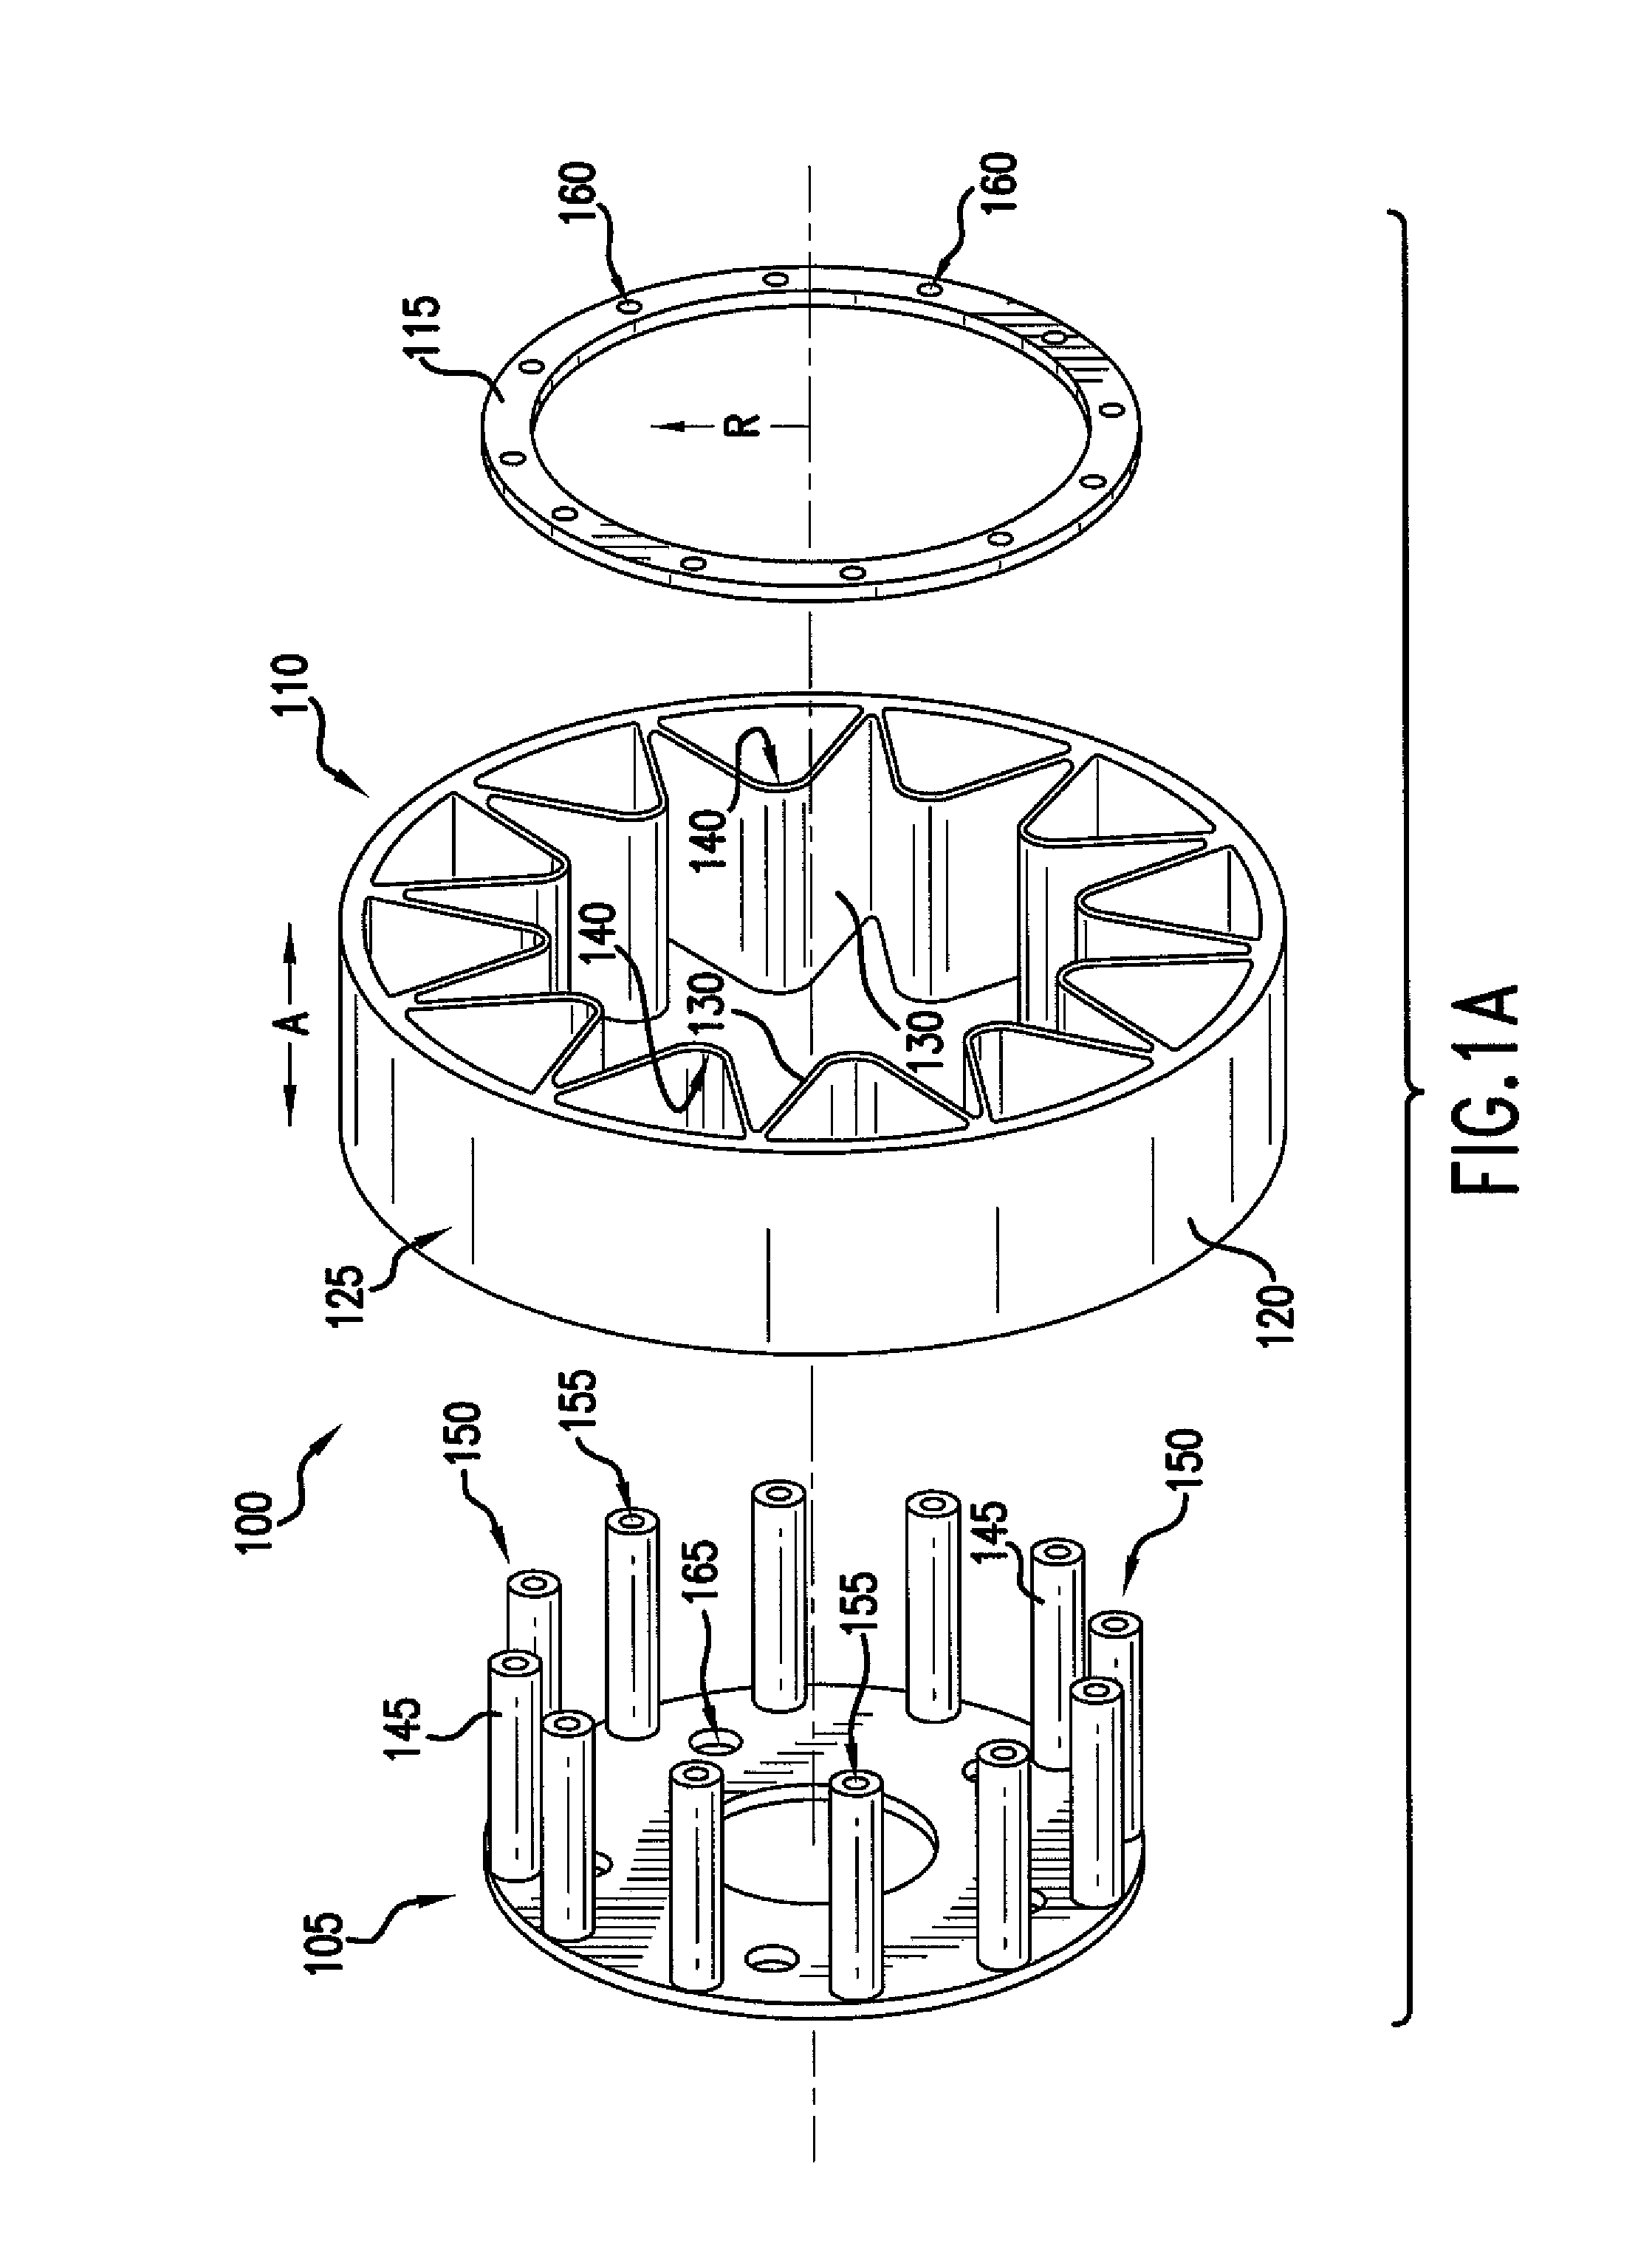 Non-pneumatic wheel assembly with removable hub